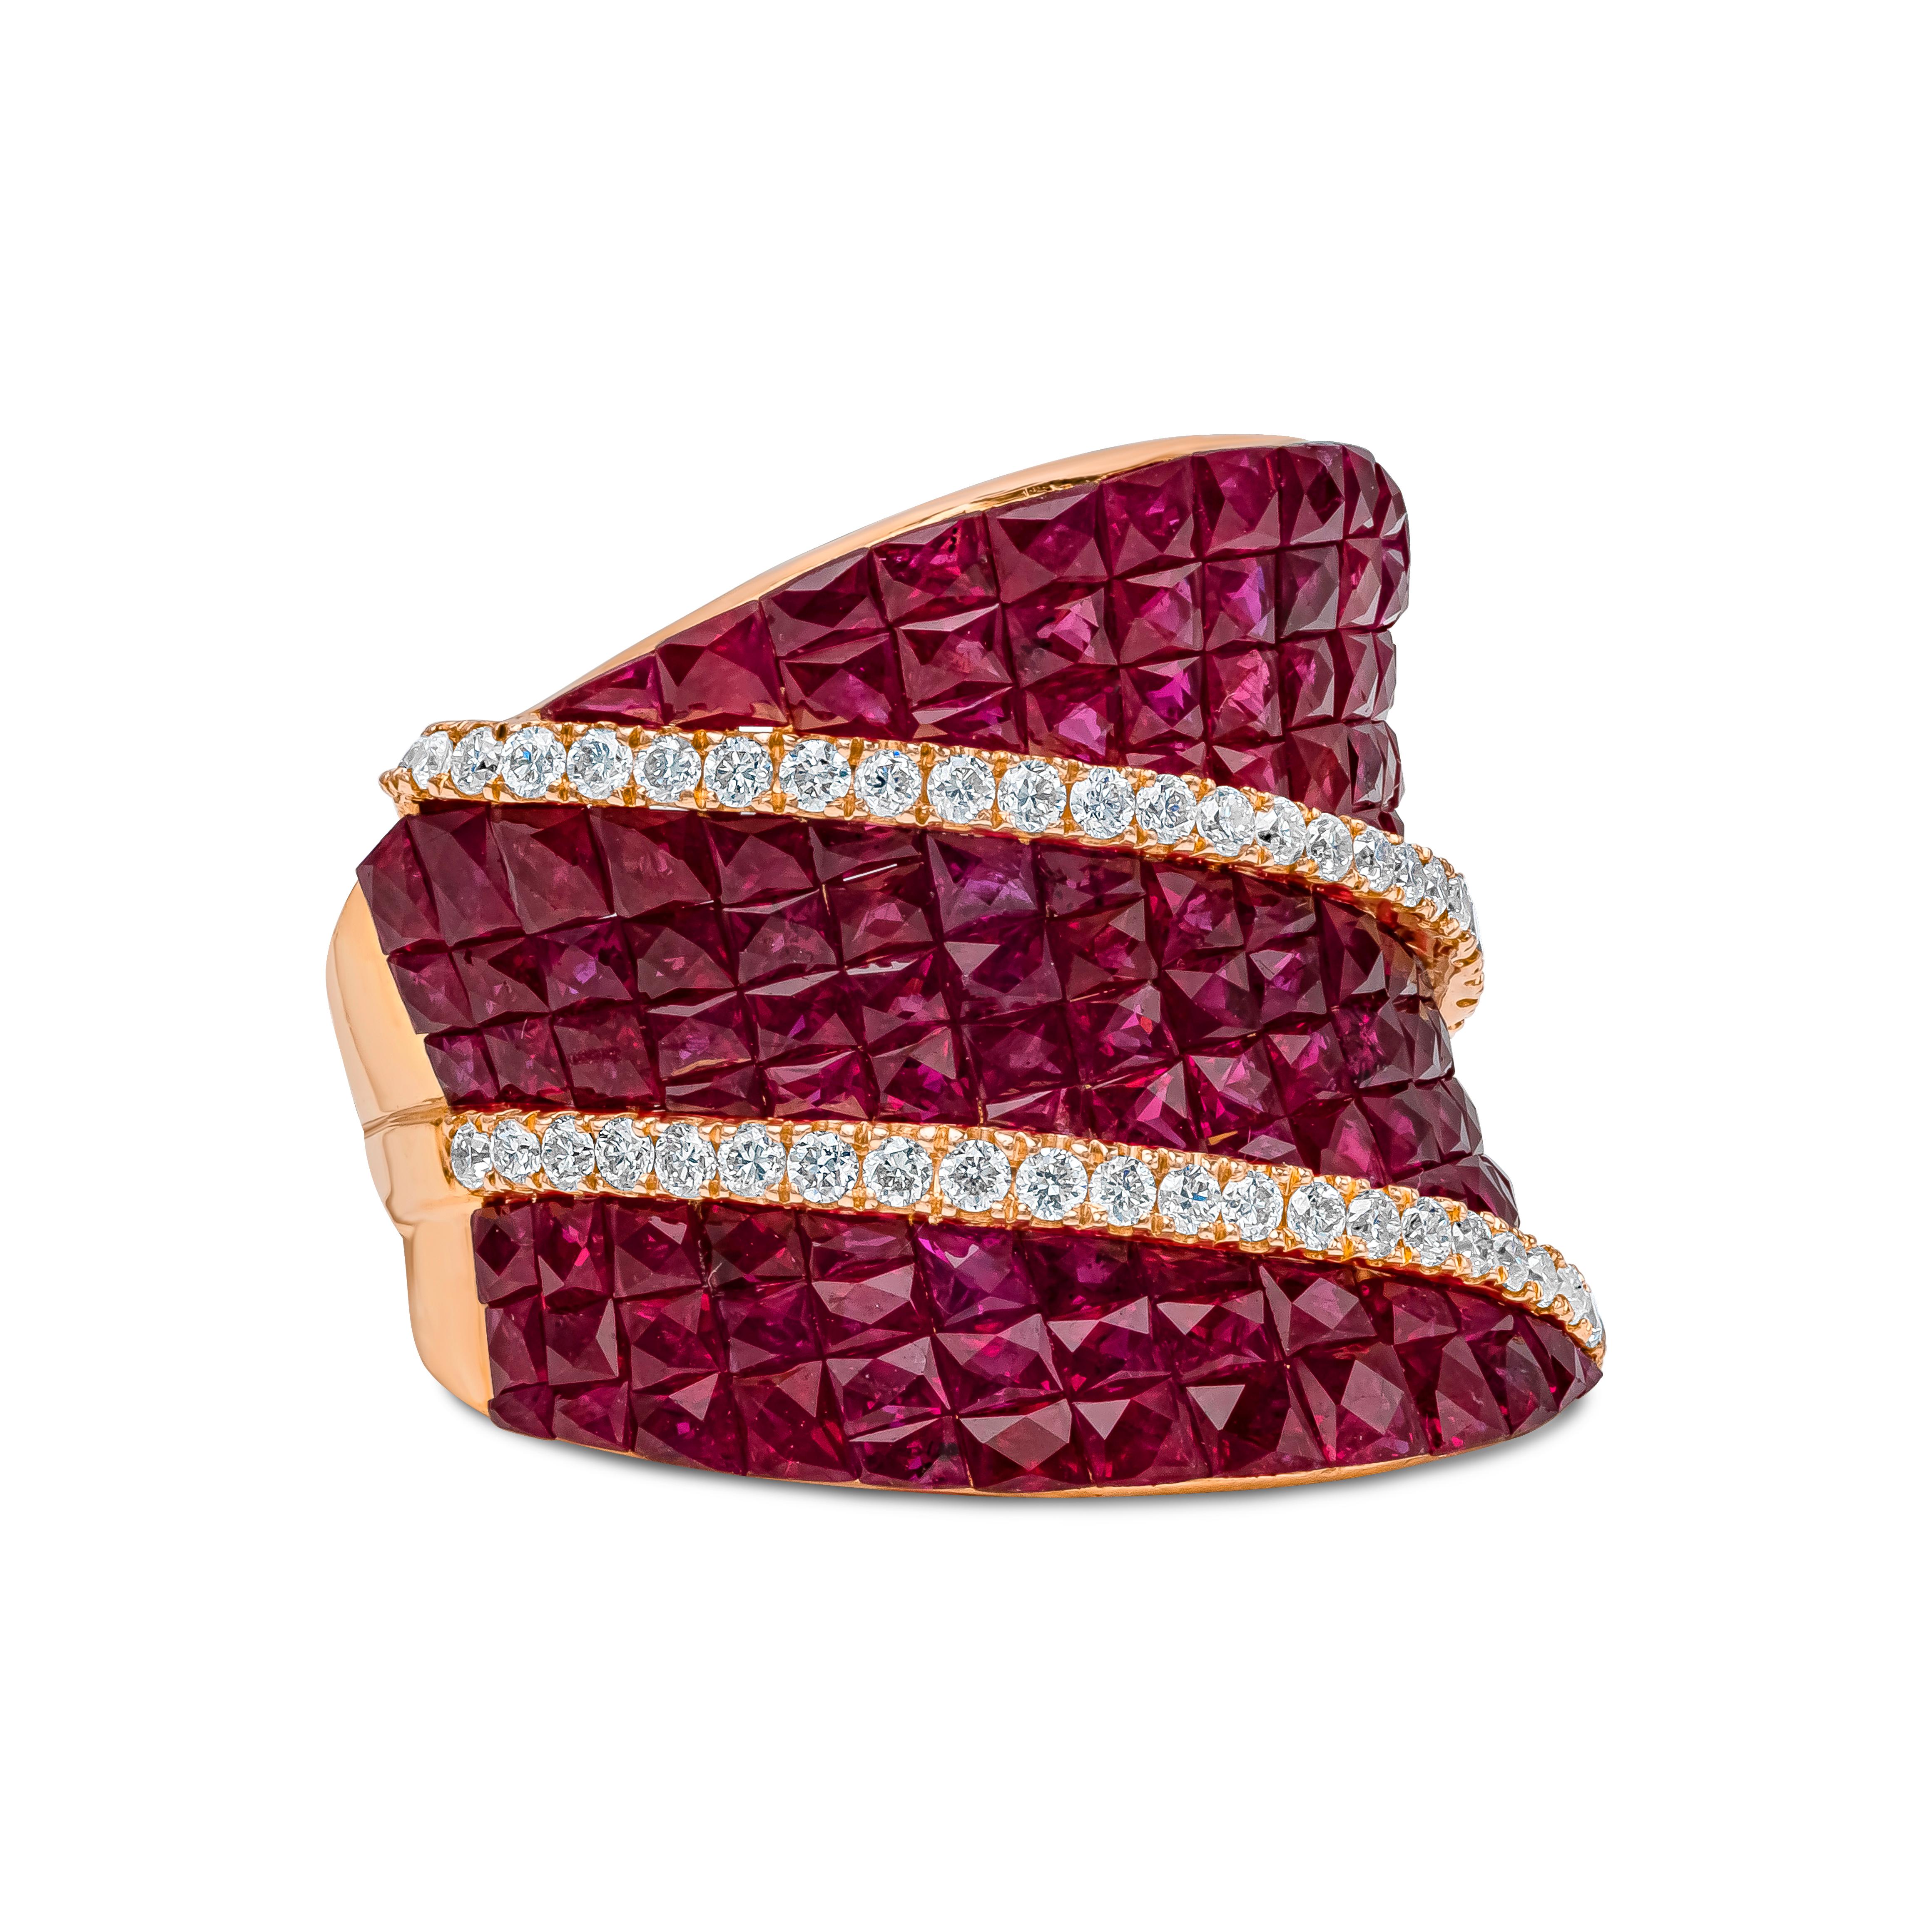 A fashionable piece of jewelry showcasing a cluster of invisible set rubies, accented by round brilliant diamonds. The gemstones are set in a beautiful concave mounting made in 18k rose gold. Rubies weigh 6.90 carats total; diamonds weigh 0.56